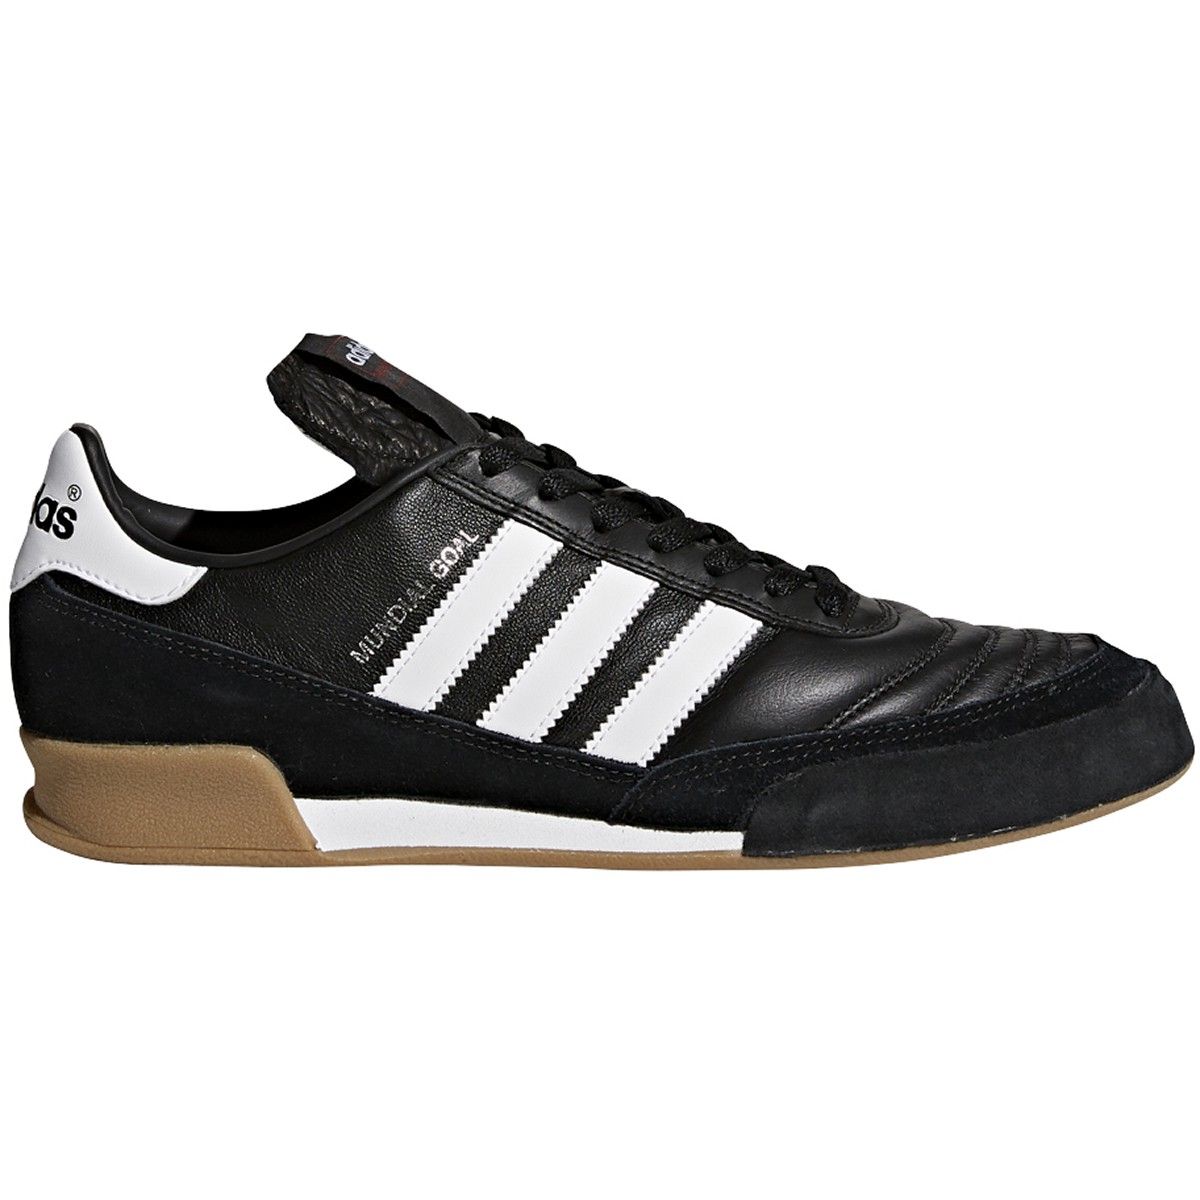 adidas Mundial Goal Mens Indoor Soccer Shoes in Black and White | 019310